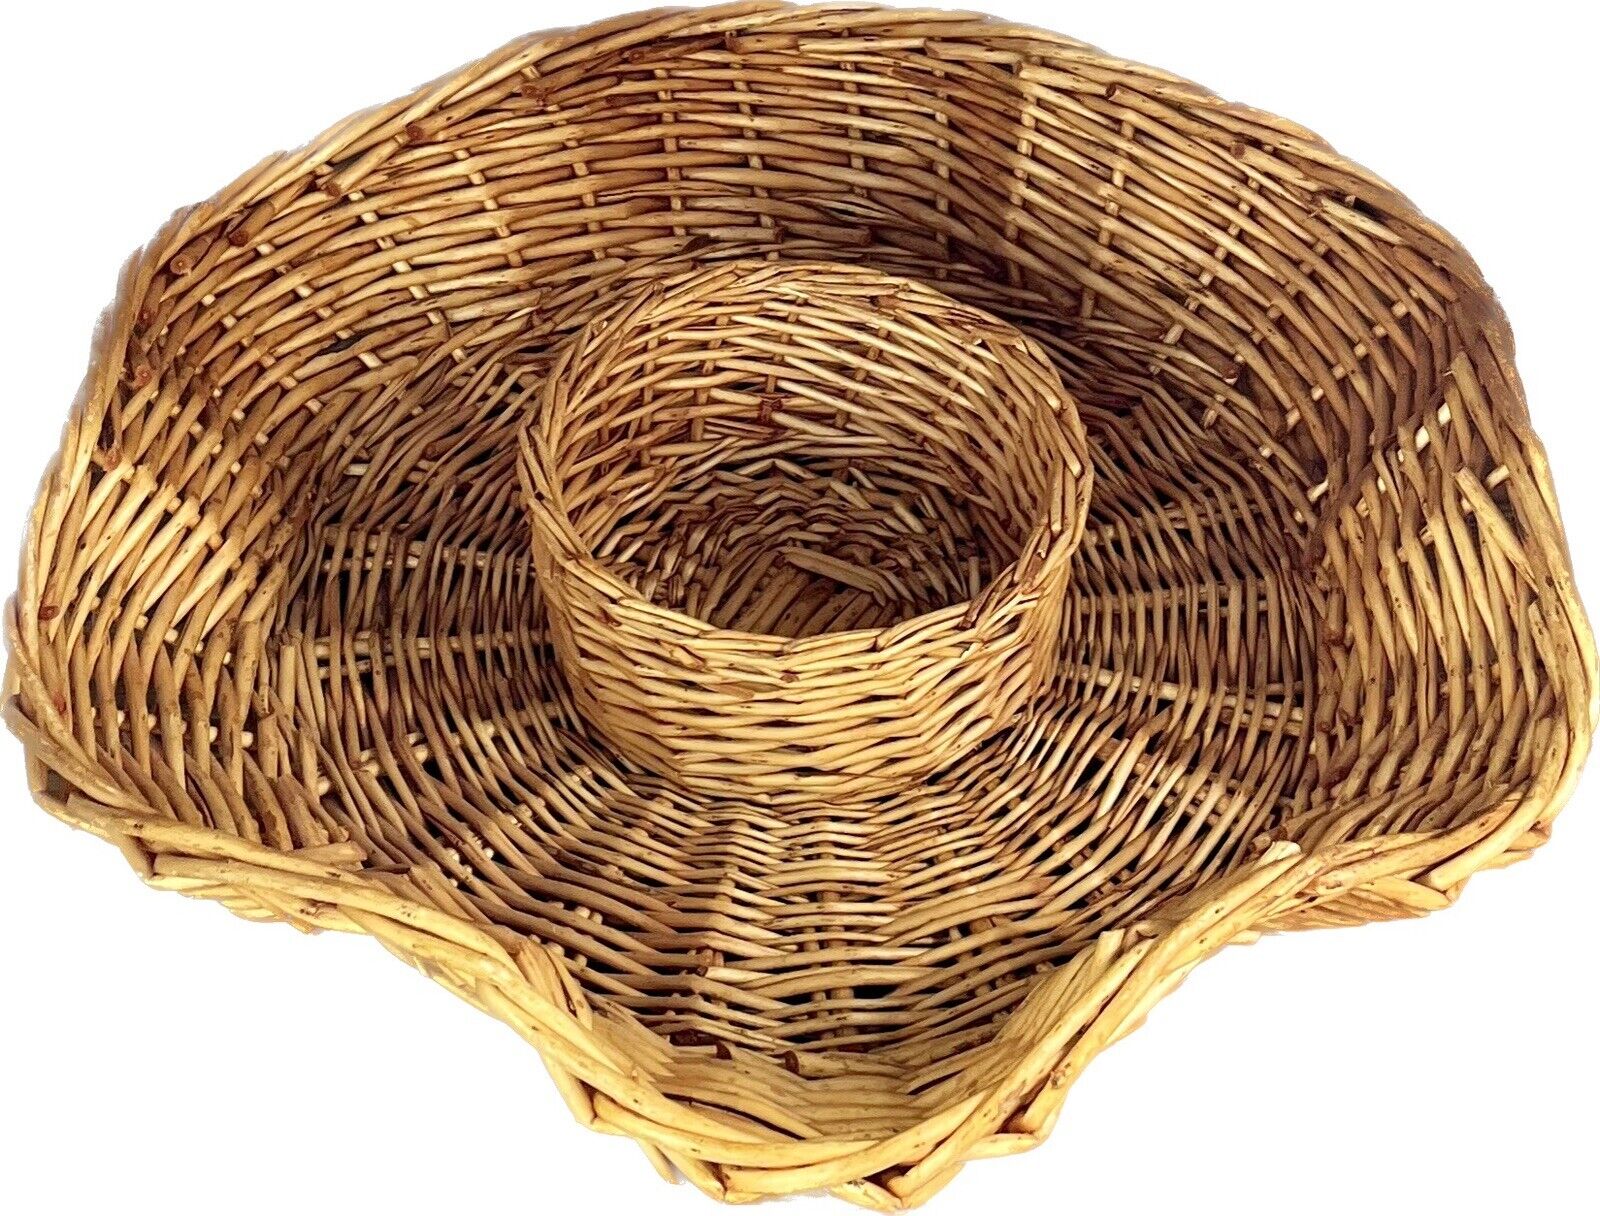 Woven Scalloped Wicker Basket Chip & Dip Serving Tray